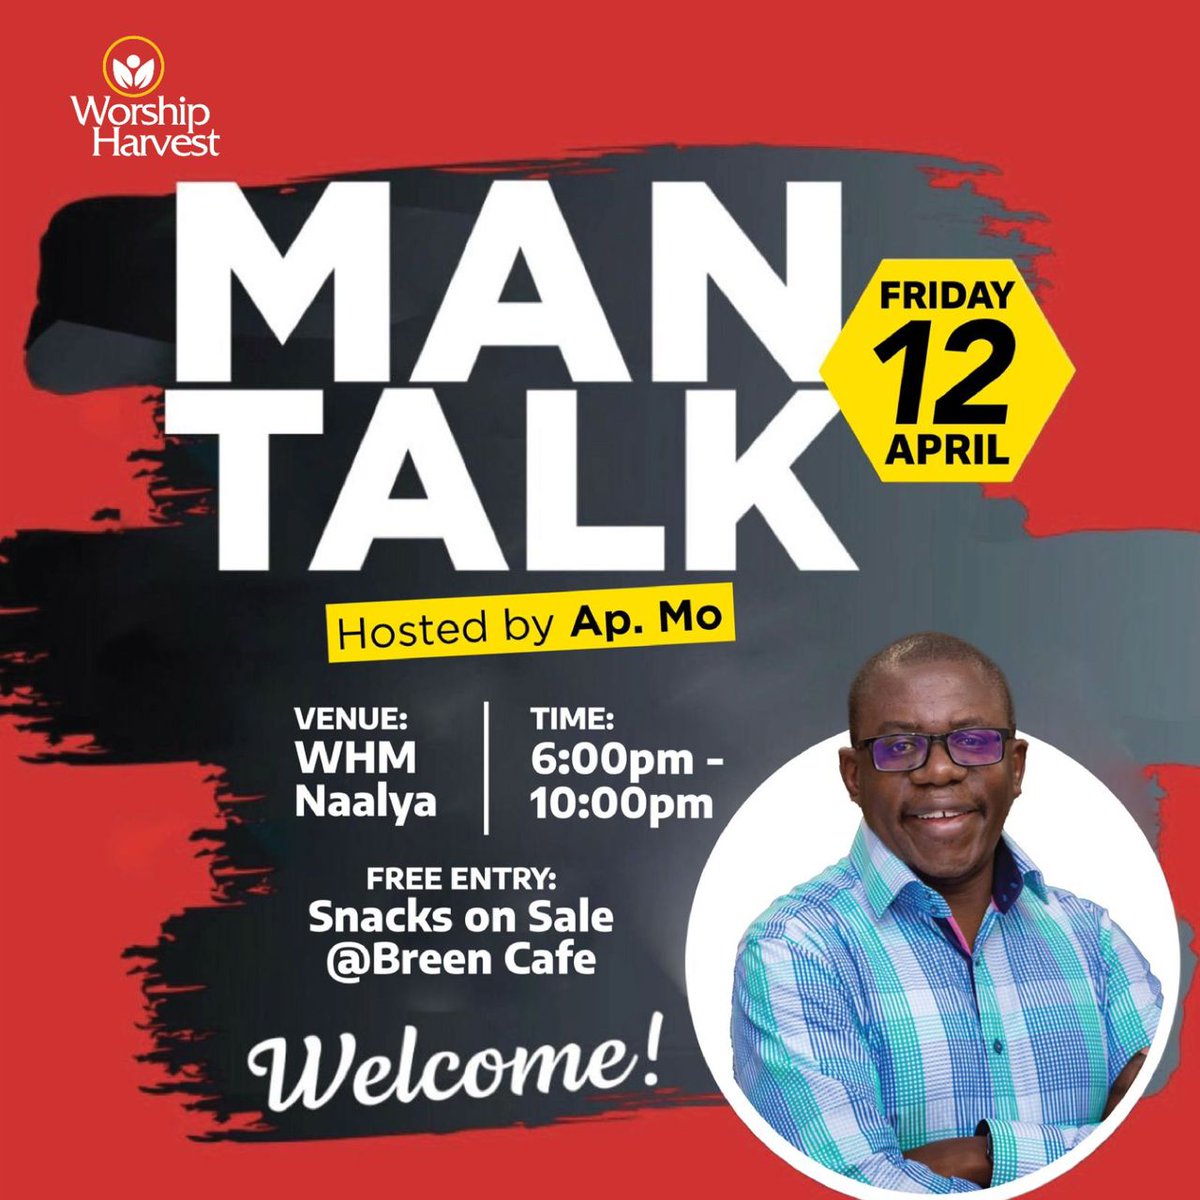 Calling all the men from all the places . We’ve got something great for you, happening this Friday. We’re looking forward to hosting you. #ManTalk #WorshipHarvest #GoingAndGlorying